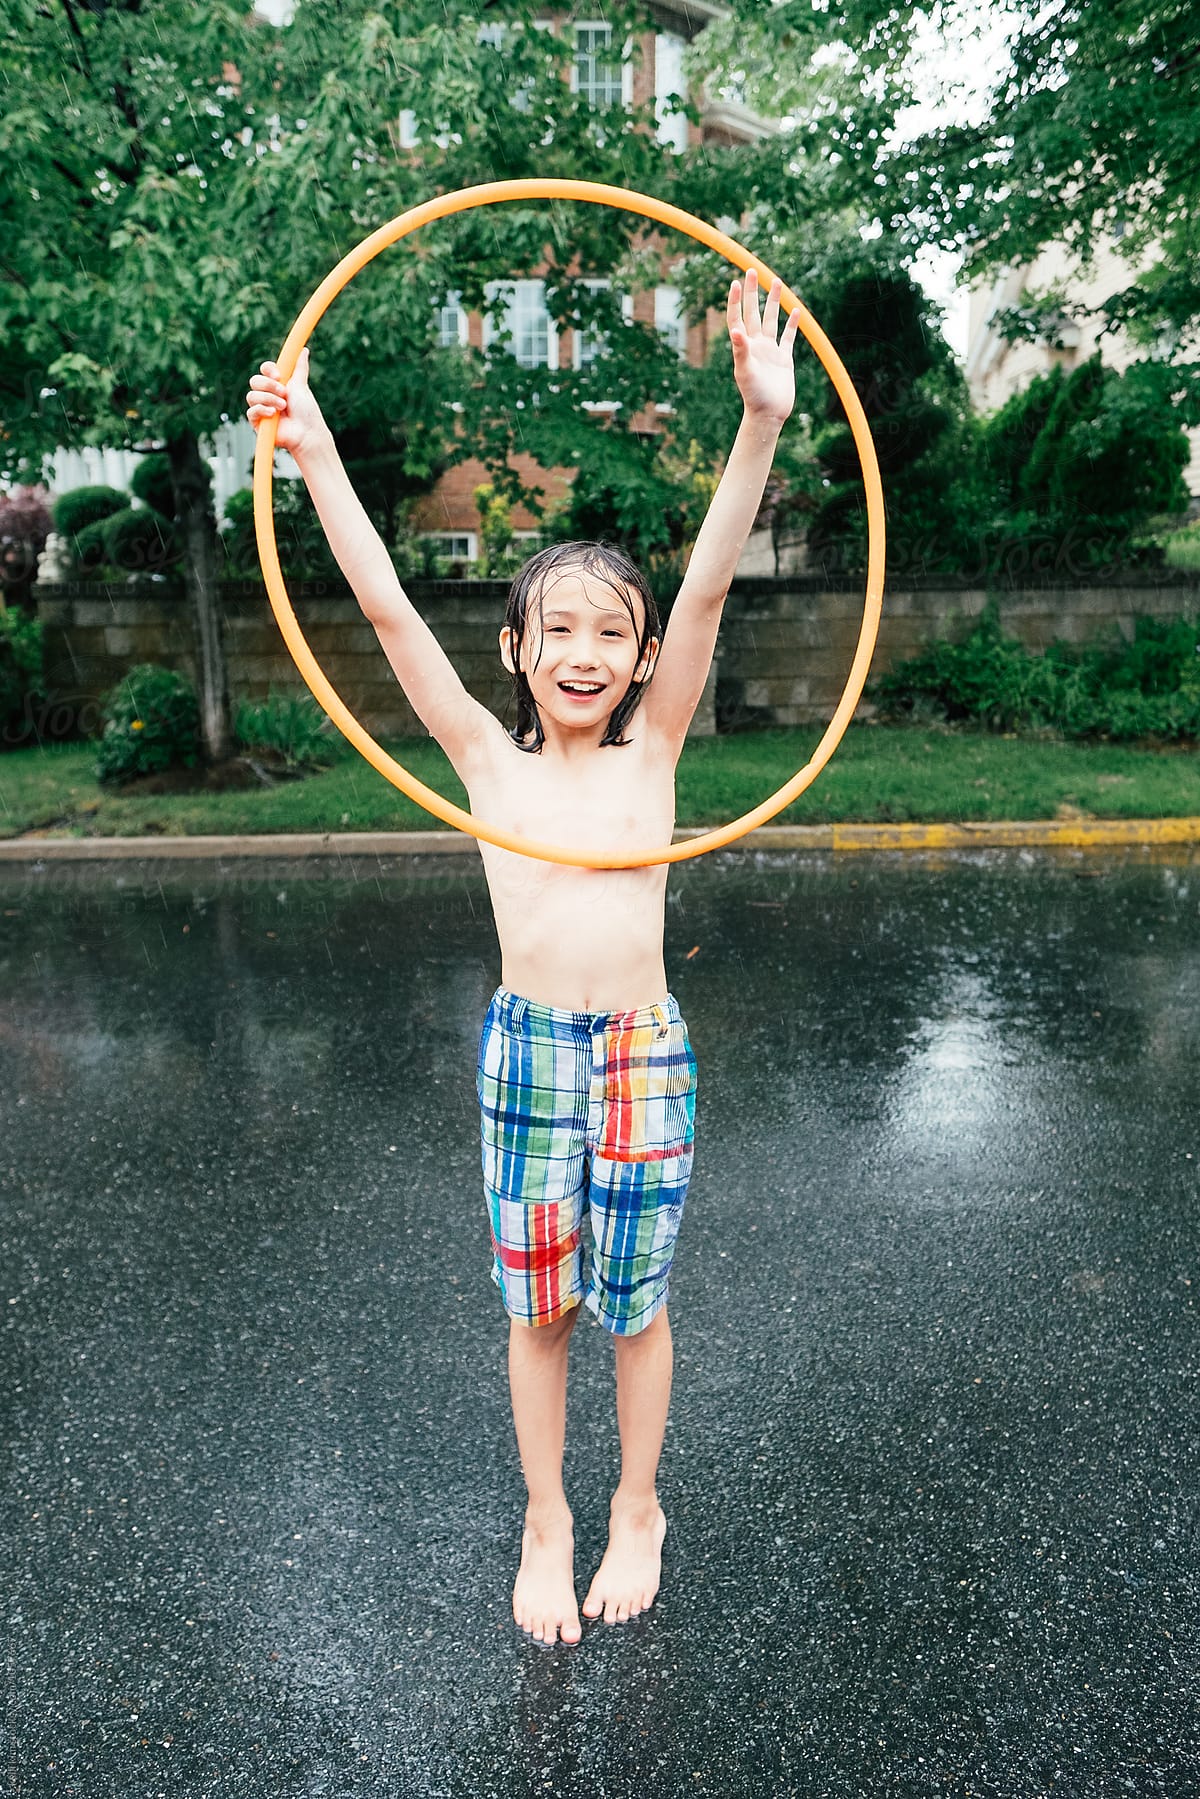 Young Boy Plays With Hula Hoop in Rain